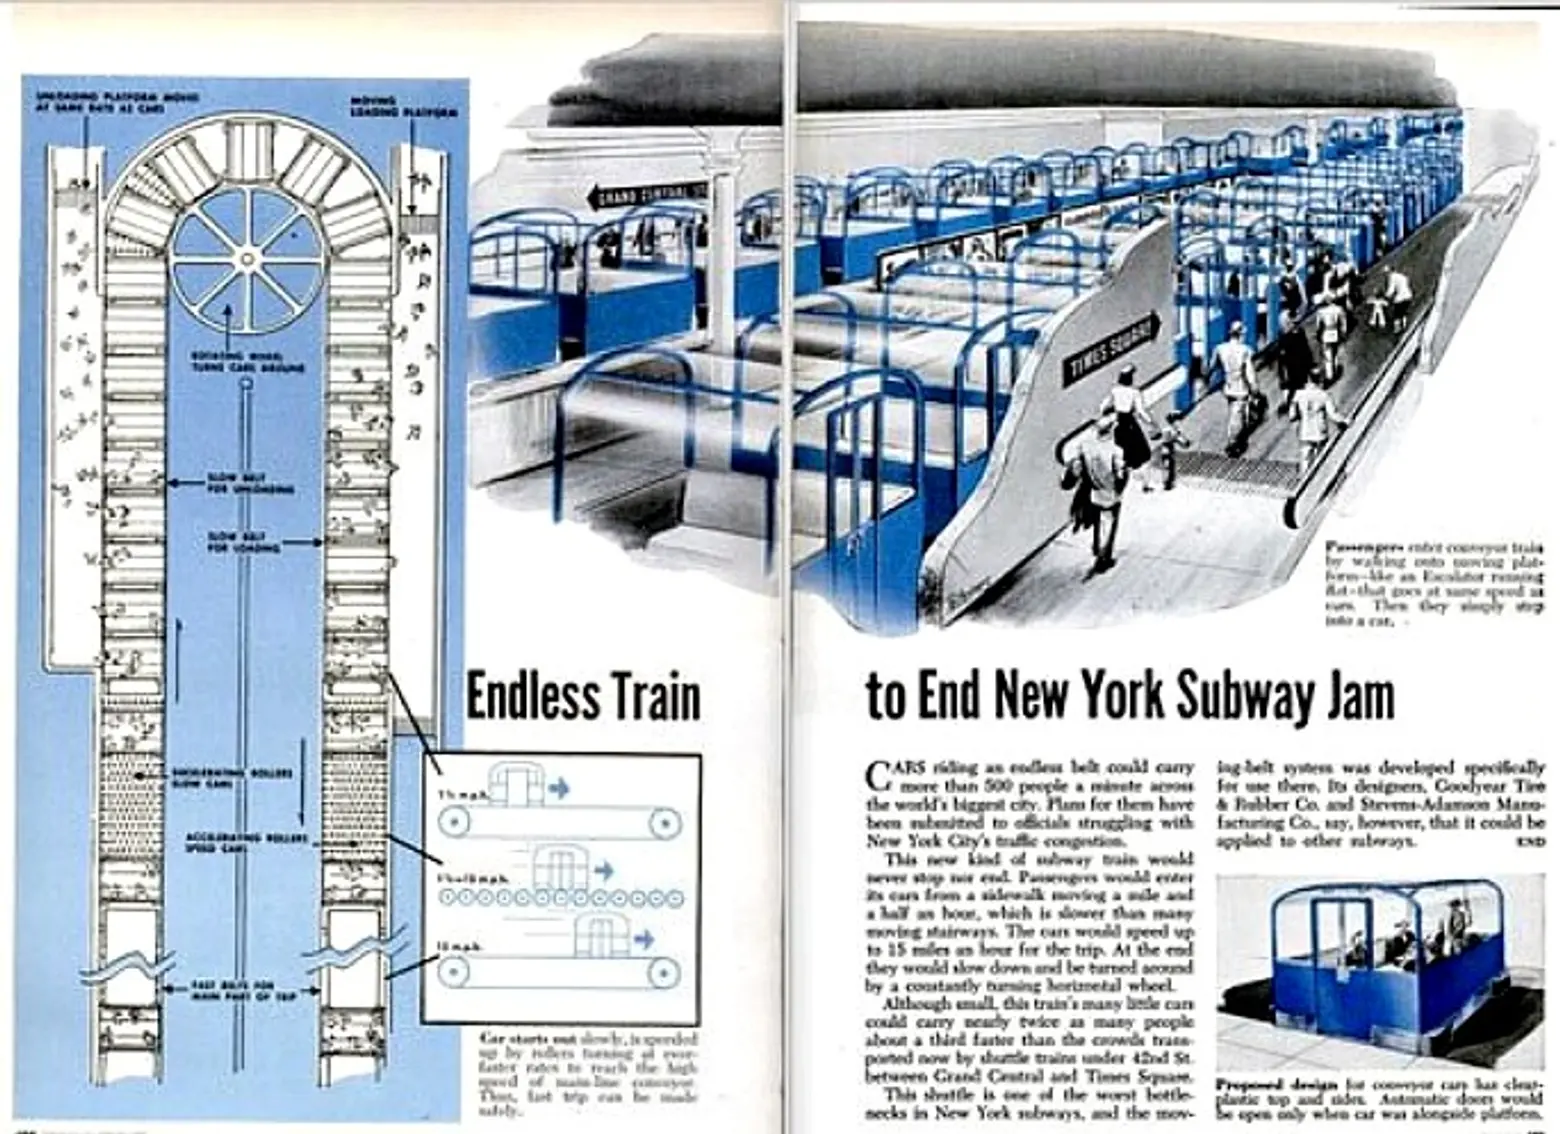 Goodyear Wanted to Create a Giant Conveyor Belt to Carry People Between Grand Central and Times Square